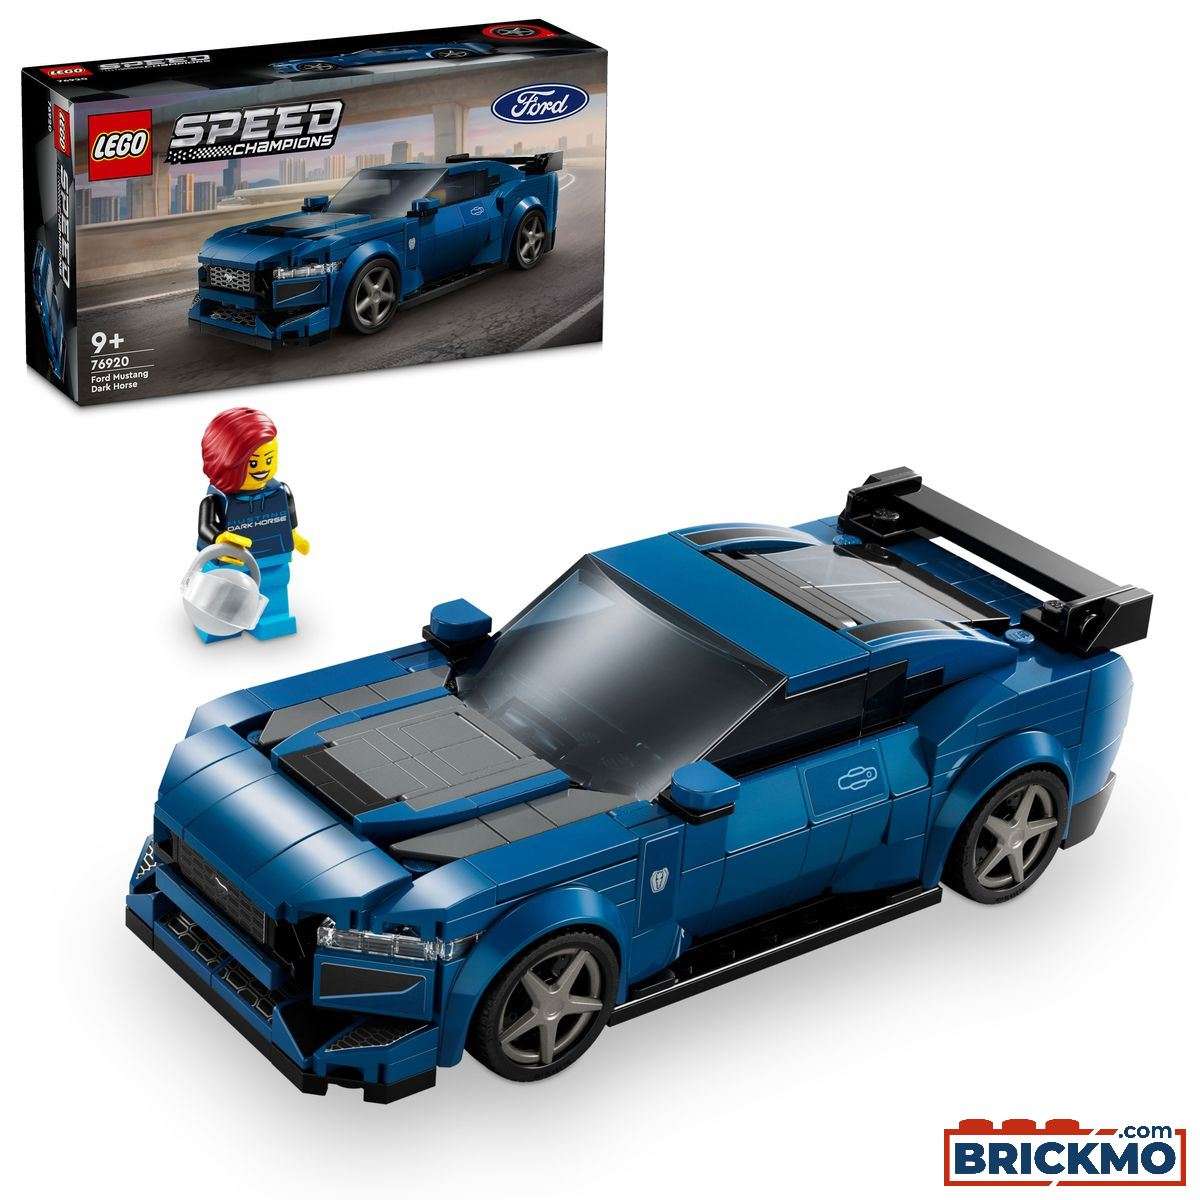 LEGO Speed Champions 76920 Ford Mustang Dark Horse Sports Car 76920